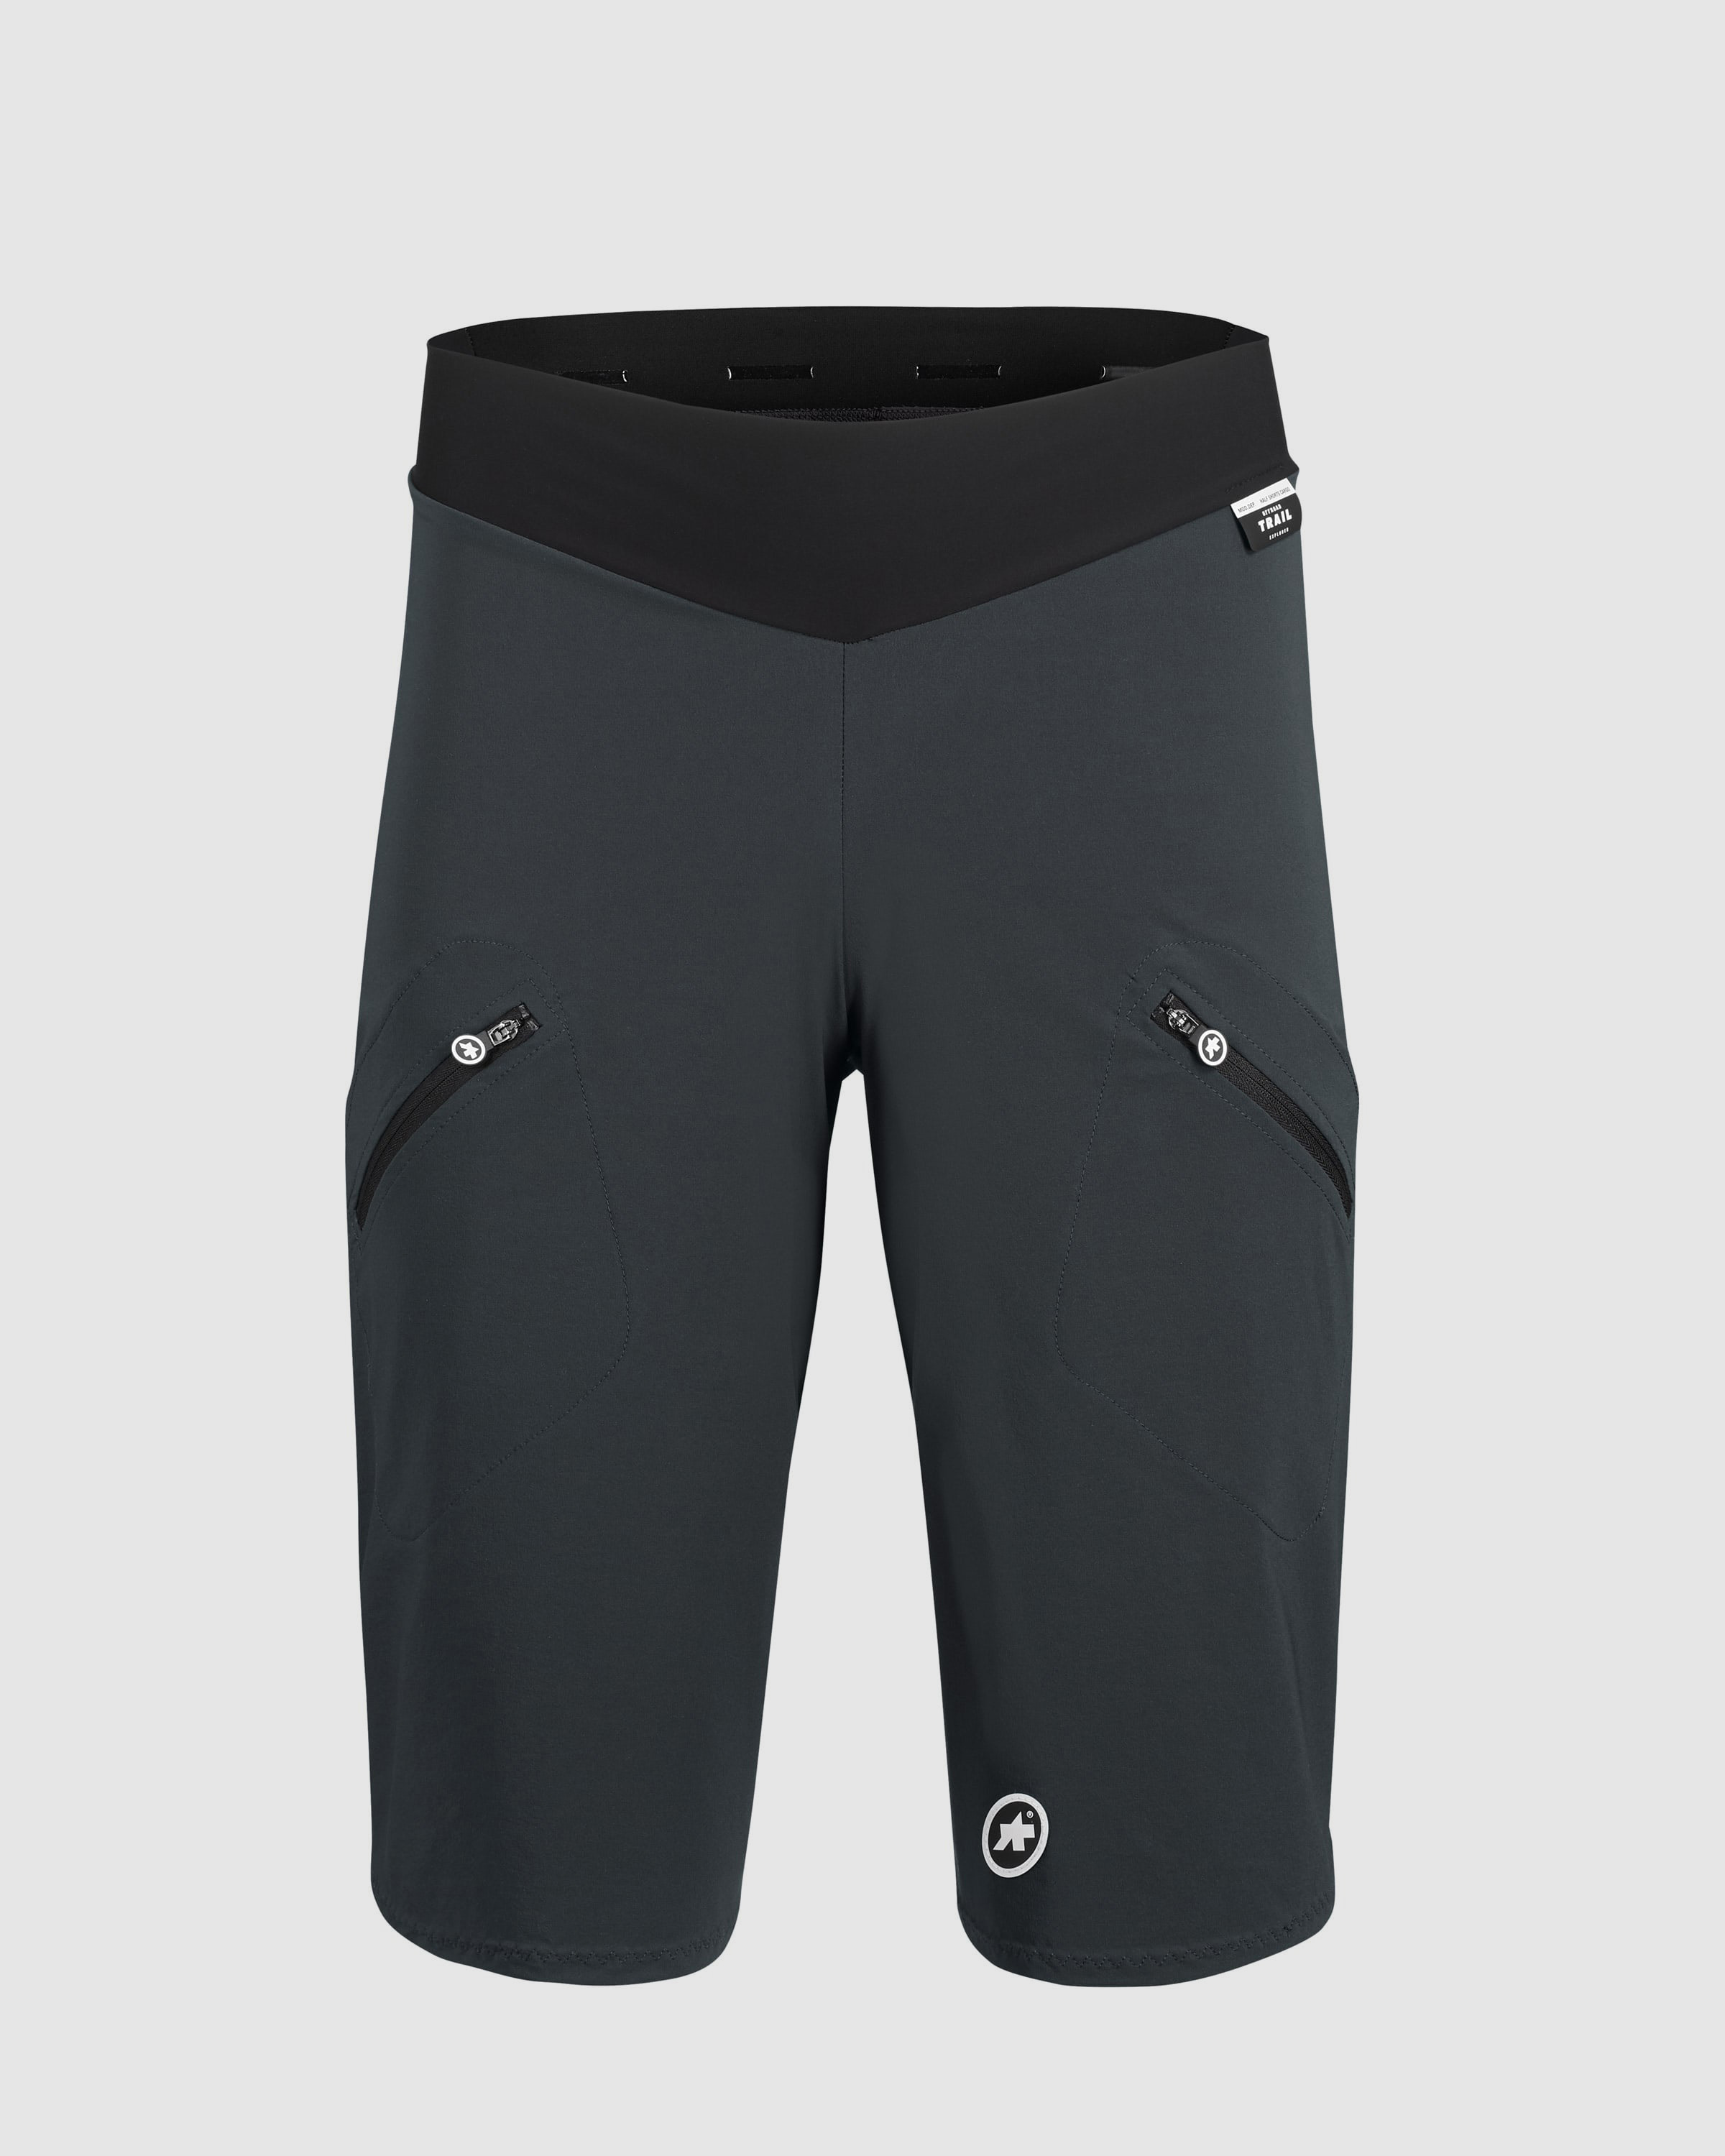 TRAIL Cargo Shorts - ASSOS Of Switzerland - Official Outlet